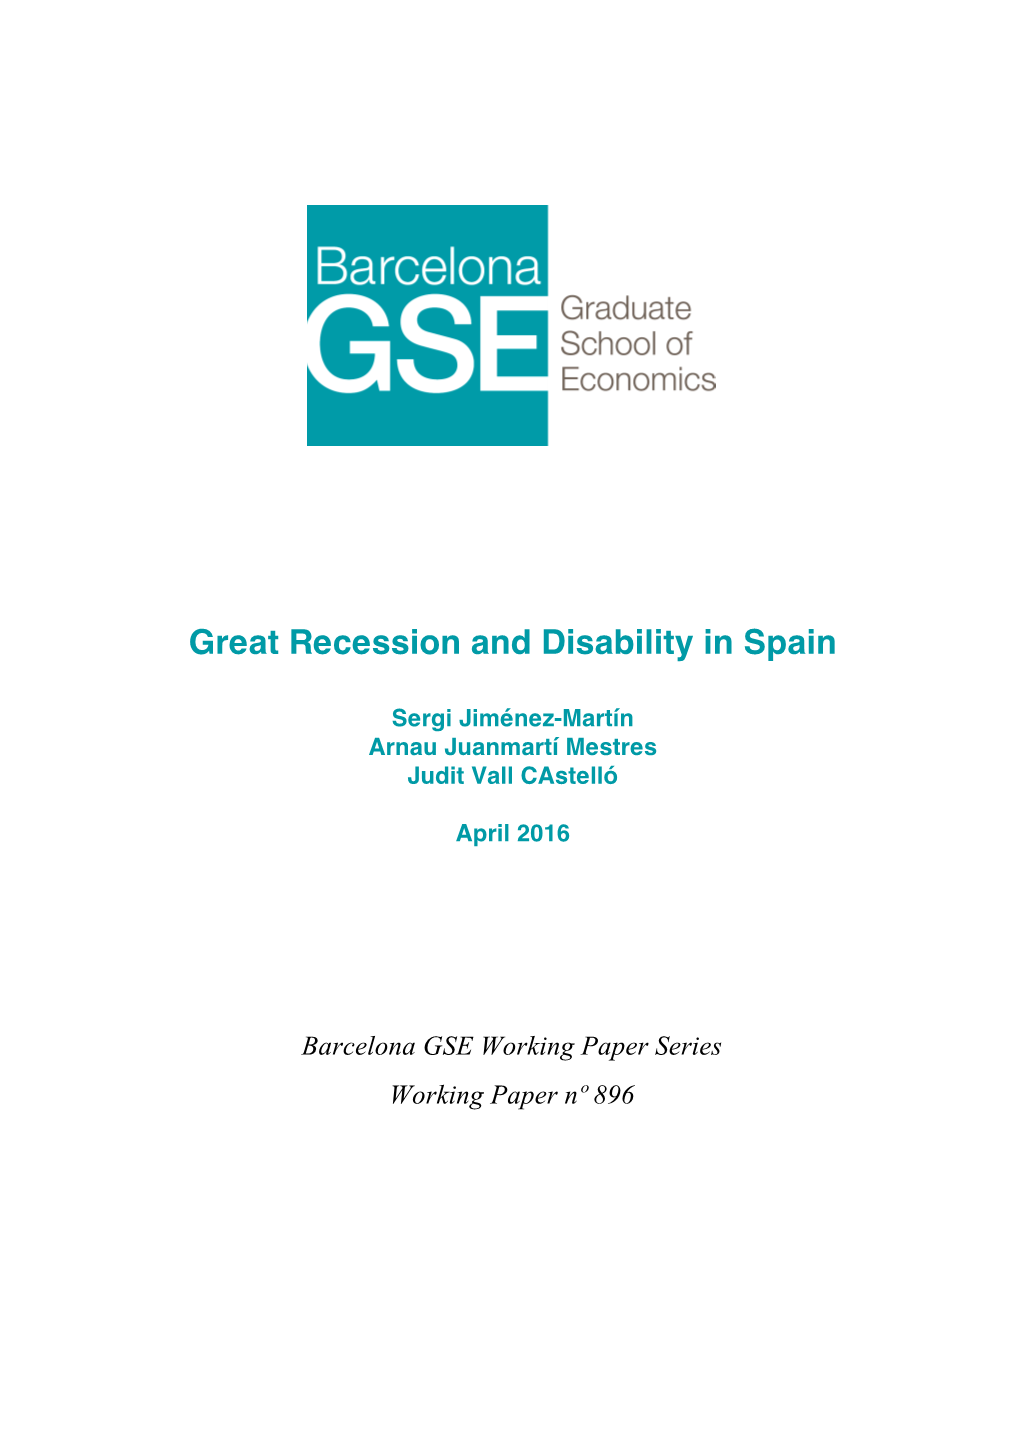 Great Recession and Disability in Spain